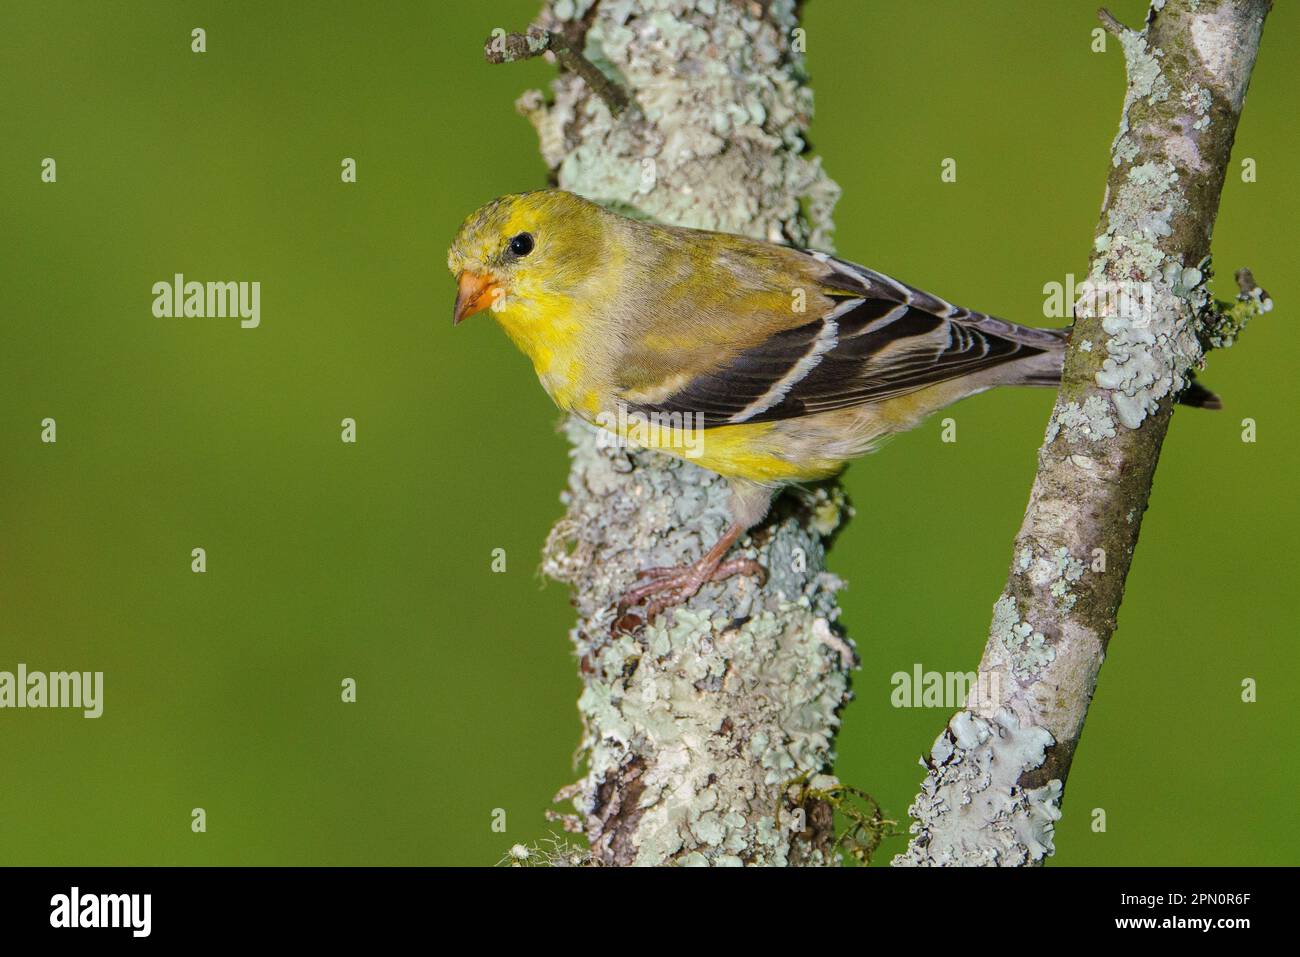 An American Goldfinch perched on a tree branch. Stock Photo